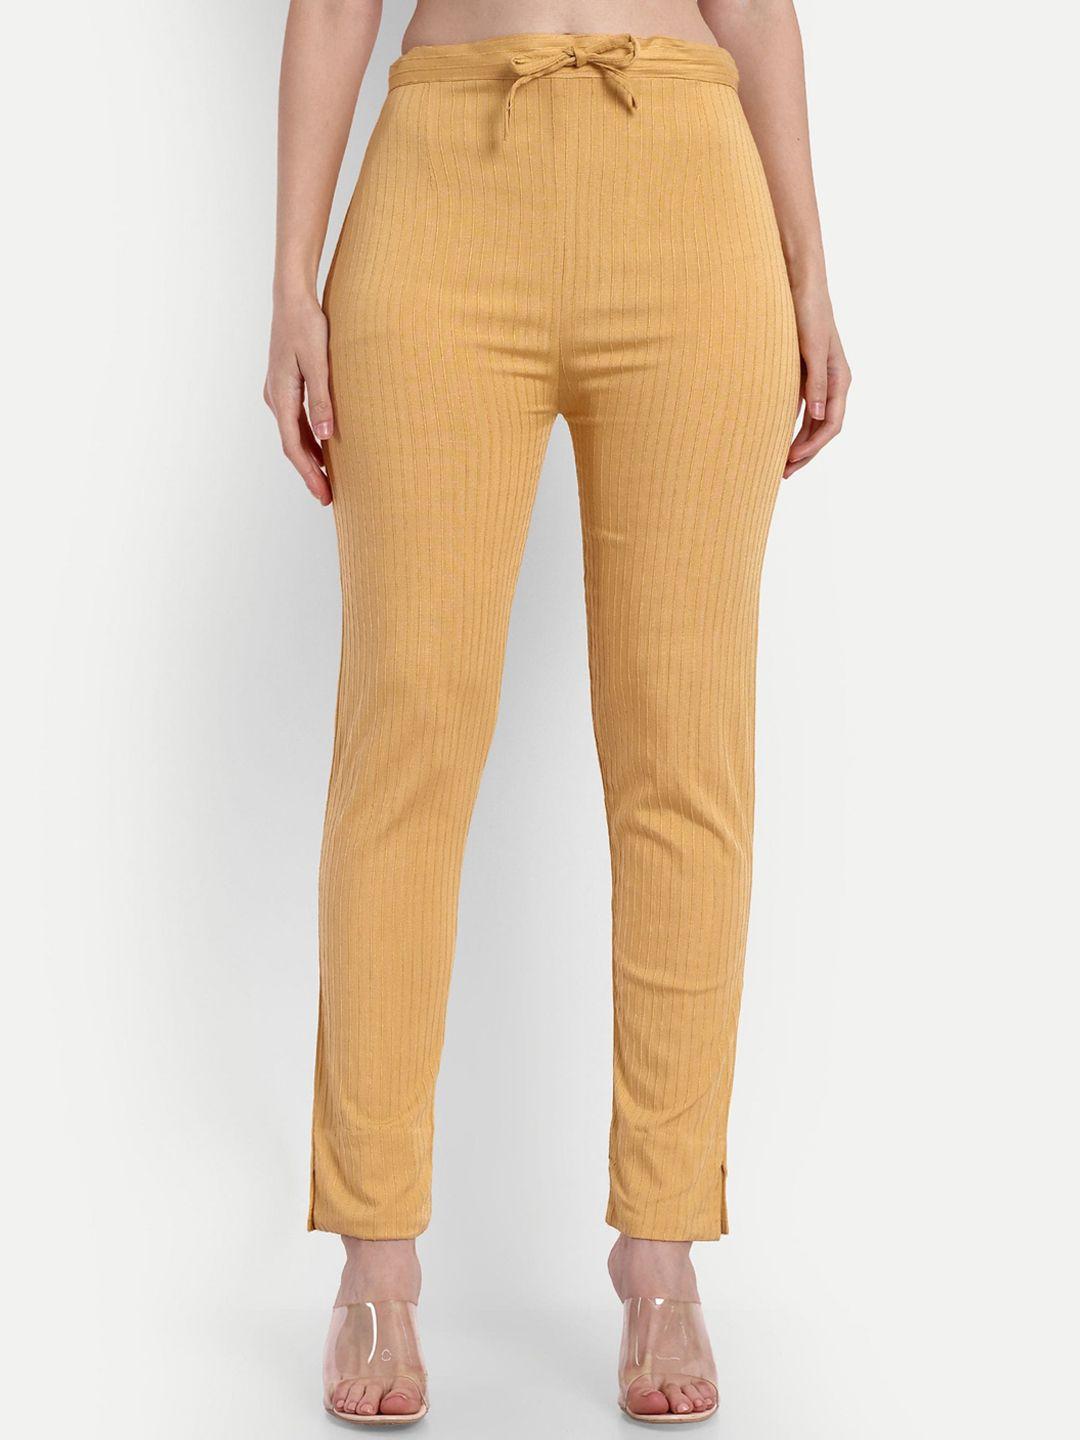 bcz style women gold-toned comfort slim fit trousers